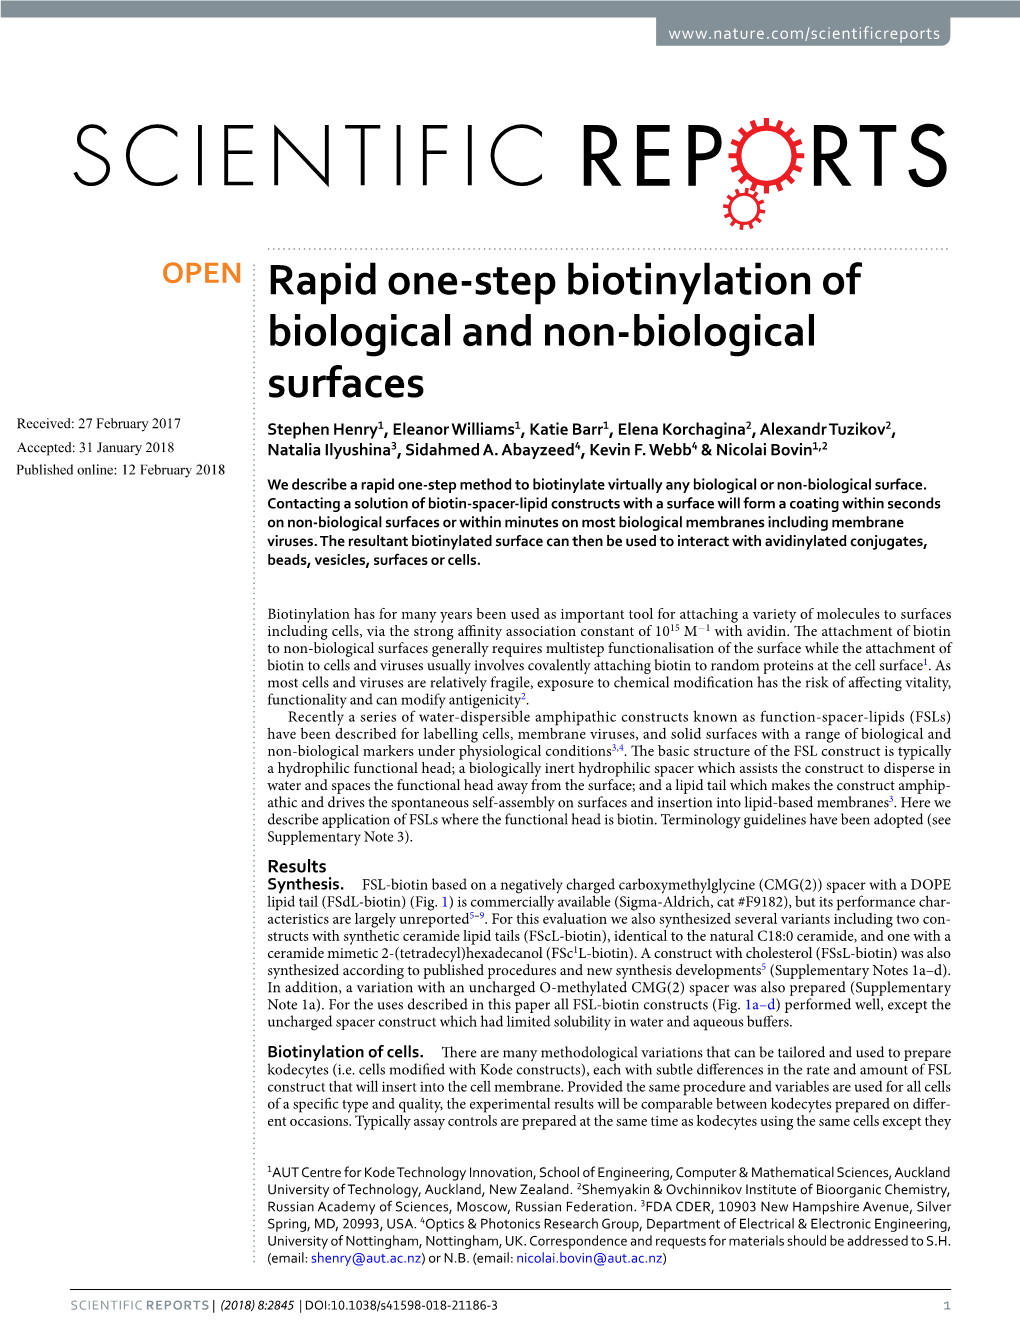 Rapid One-Step Biotinylation of Biological and Non-Biological Surfaces